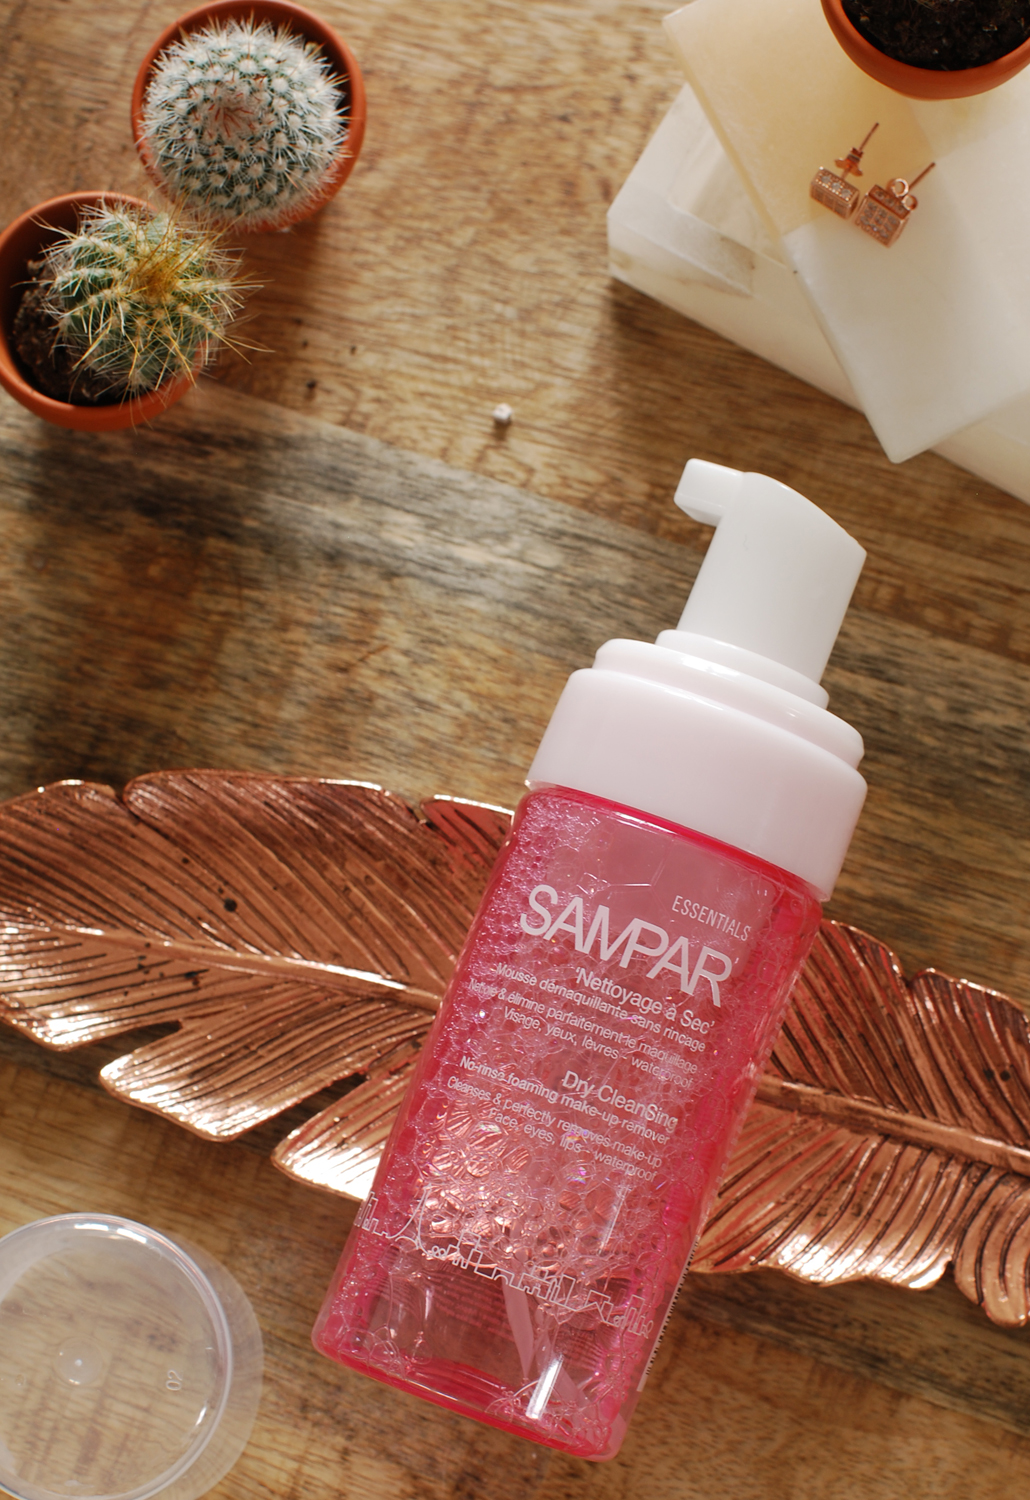 Sampar paris essentials dry cleansing make-up remover review lifestyle by linda